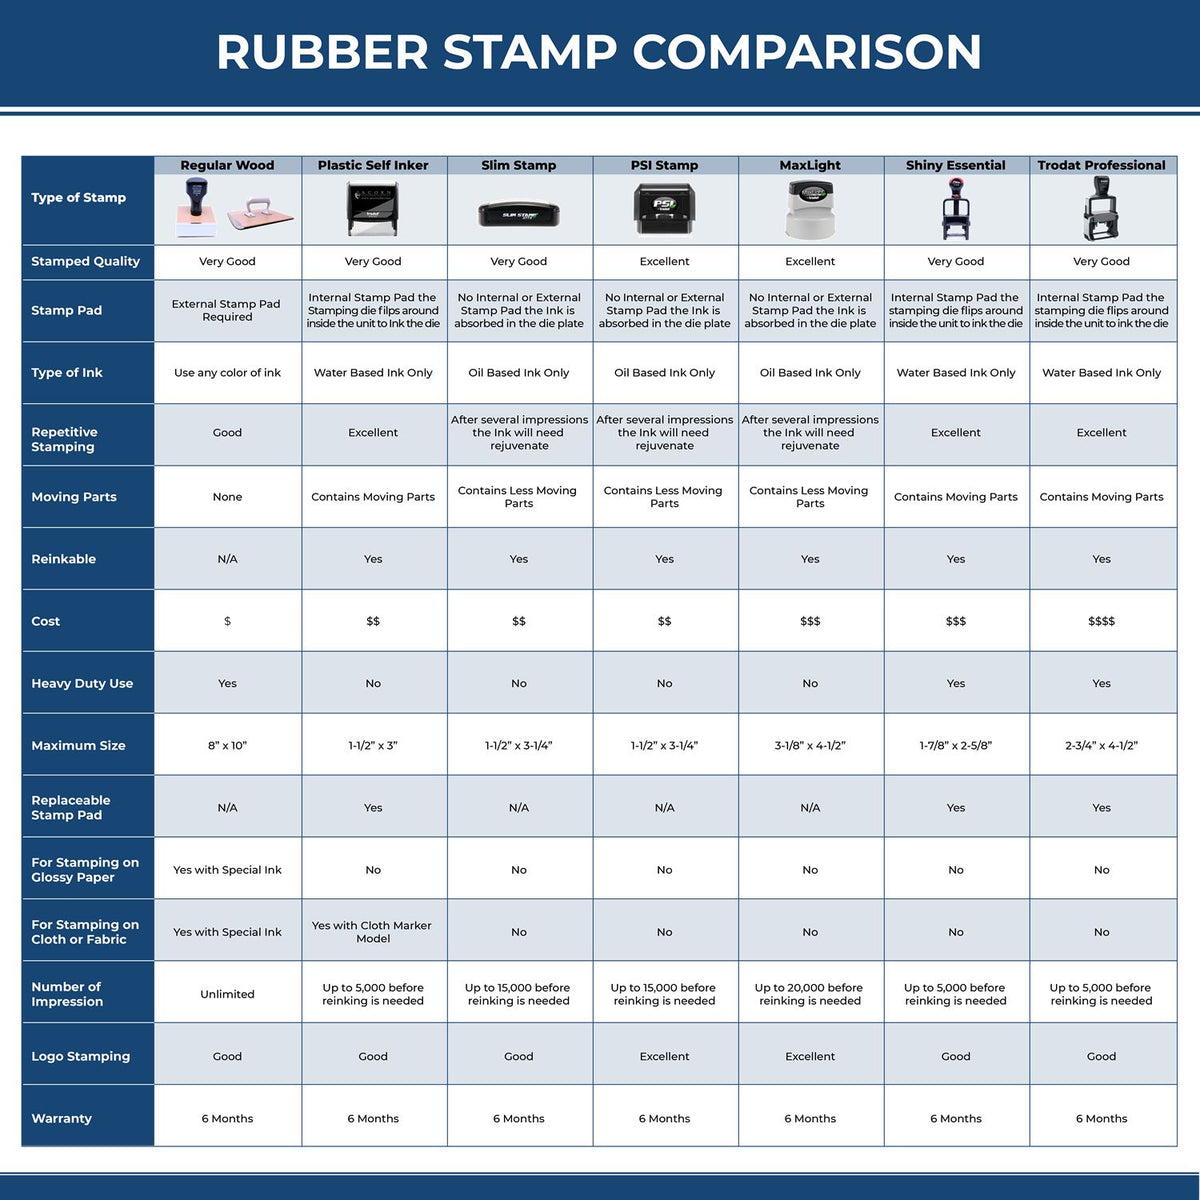 A comparison chart for the different types of mount models available for the PSI Colorado Notary Stamp.